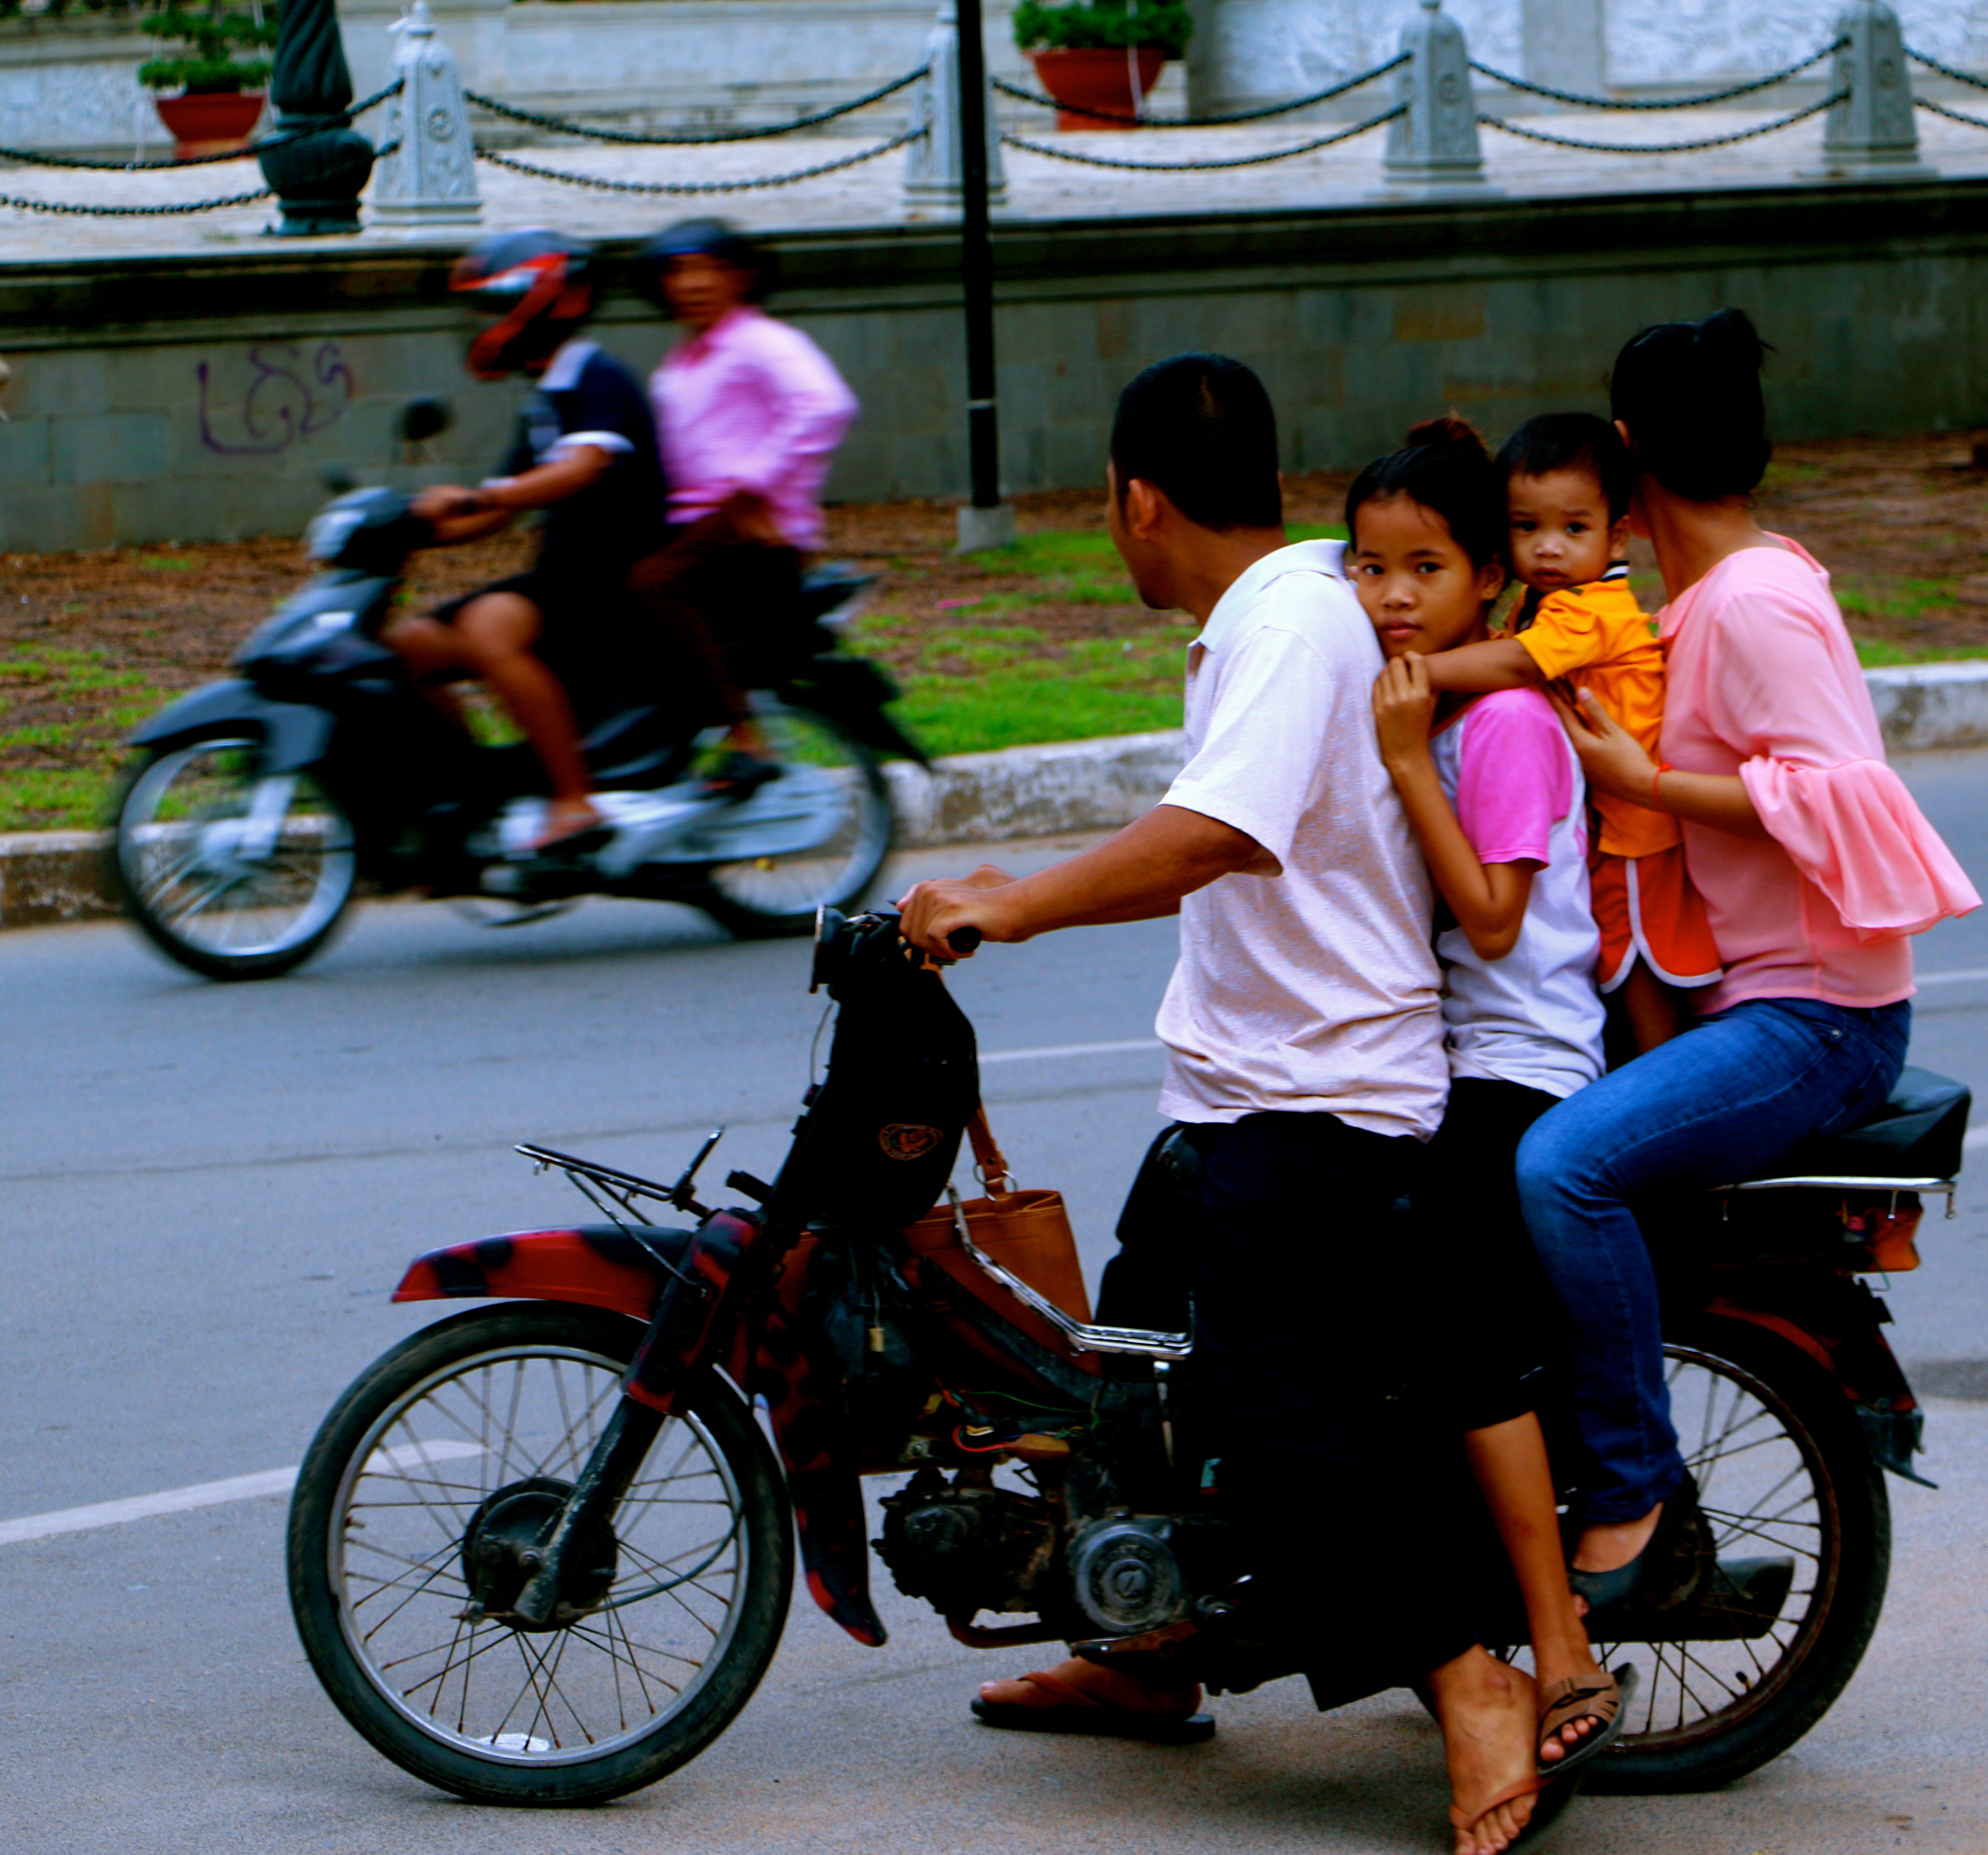 A family traveling together on the most popular means of transport in Cambodia.